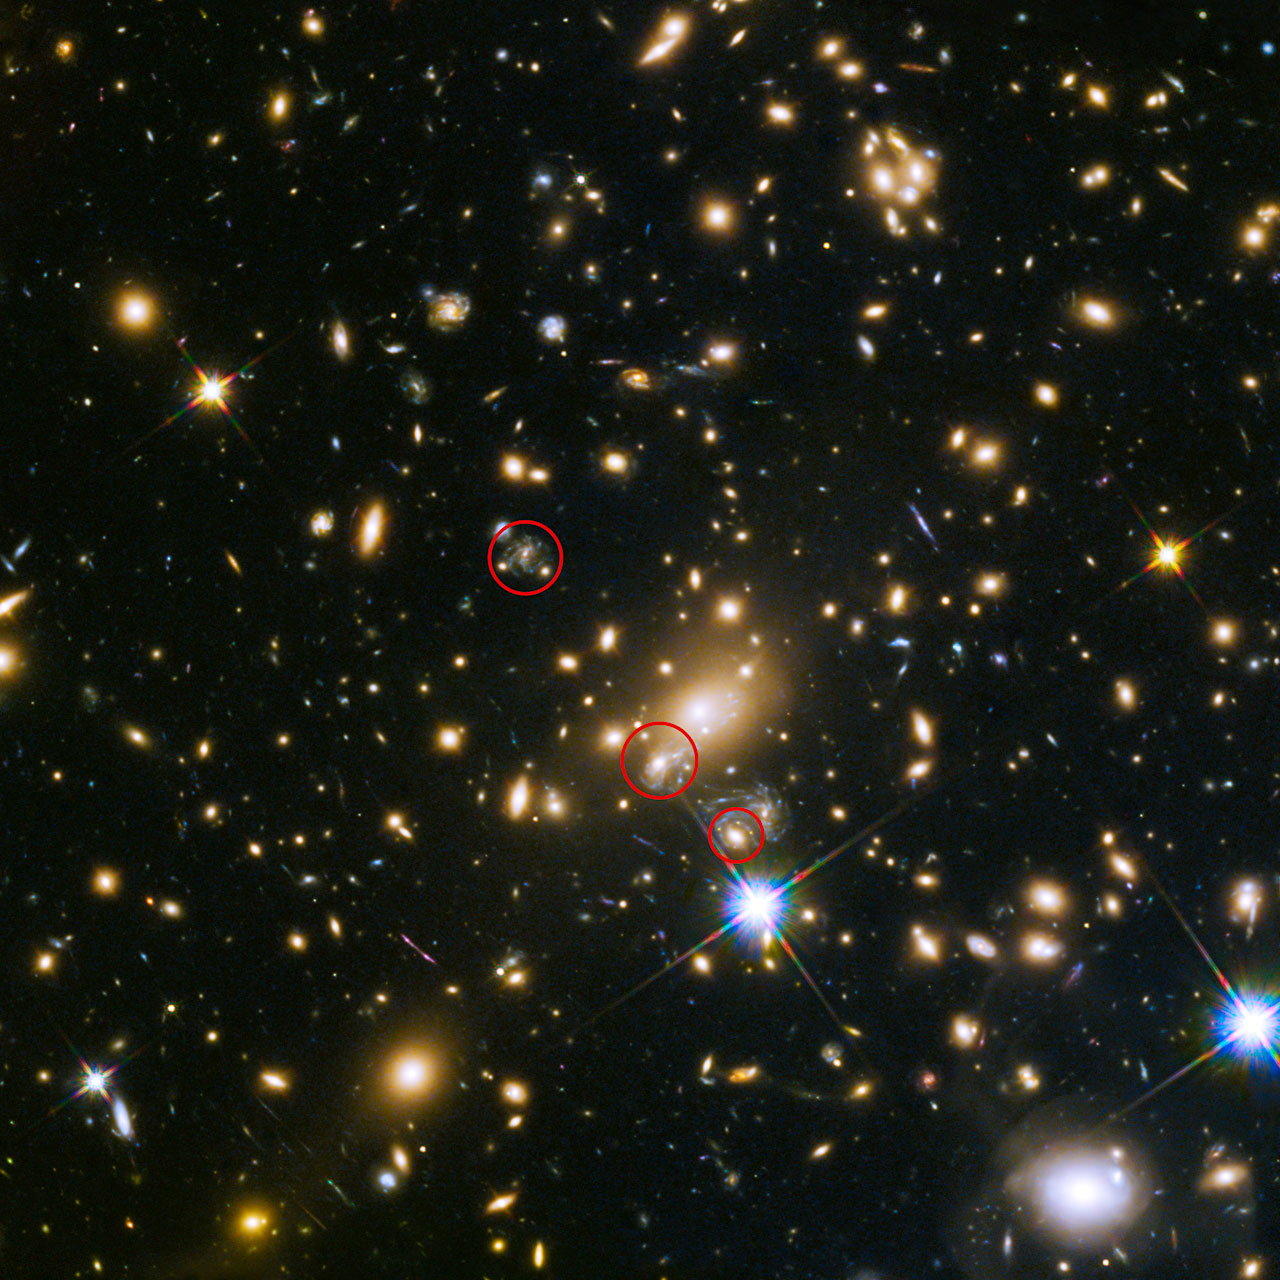 Appearance of the the Refsdal supernova